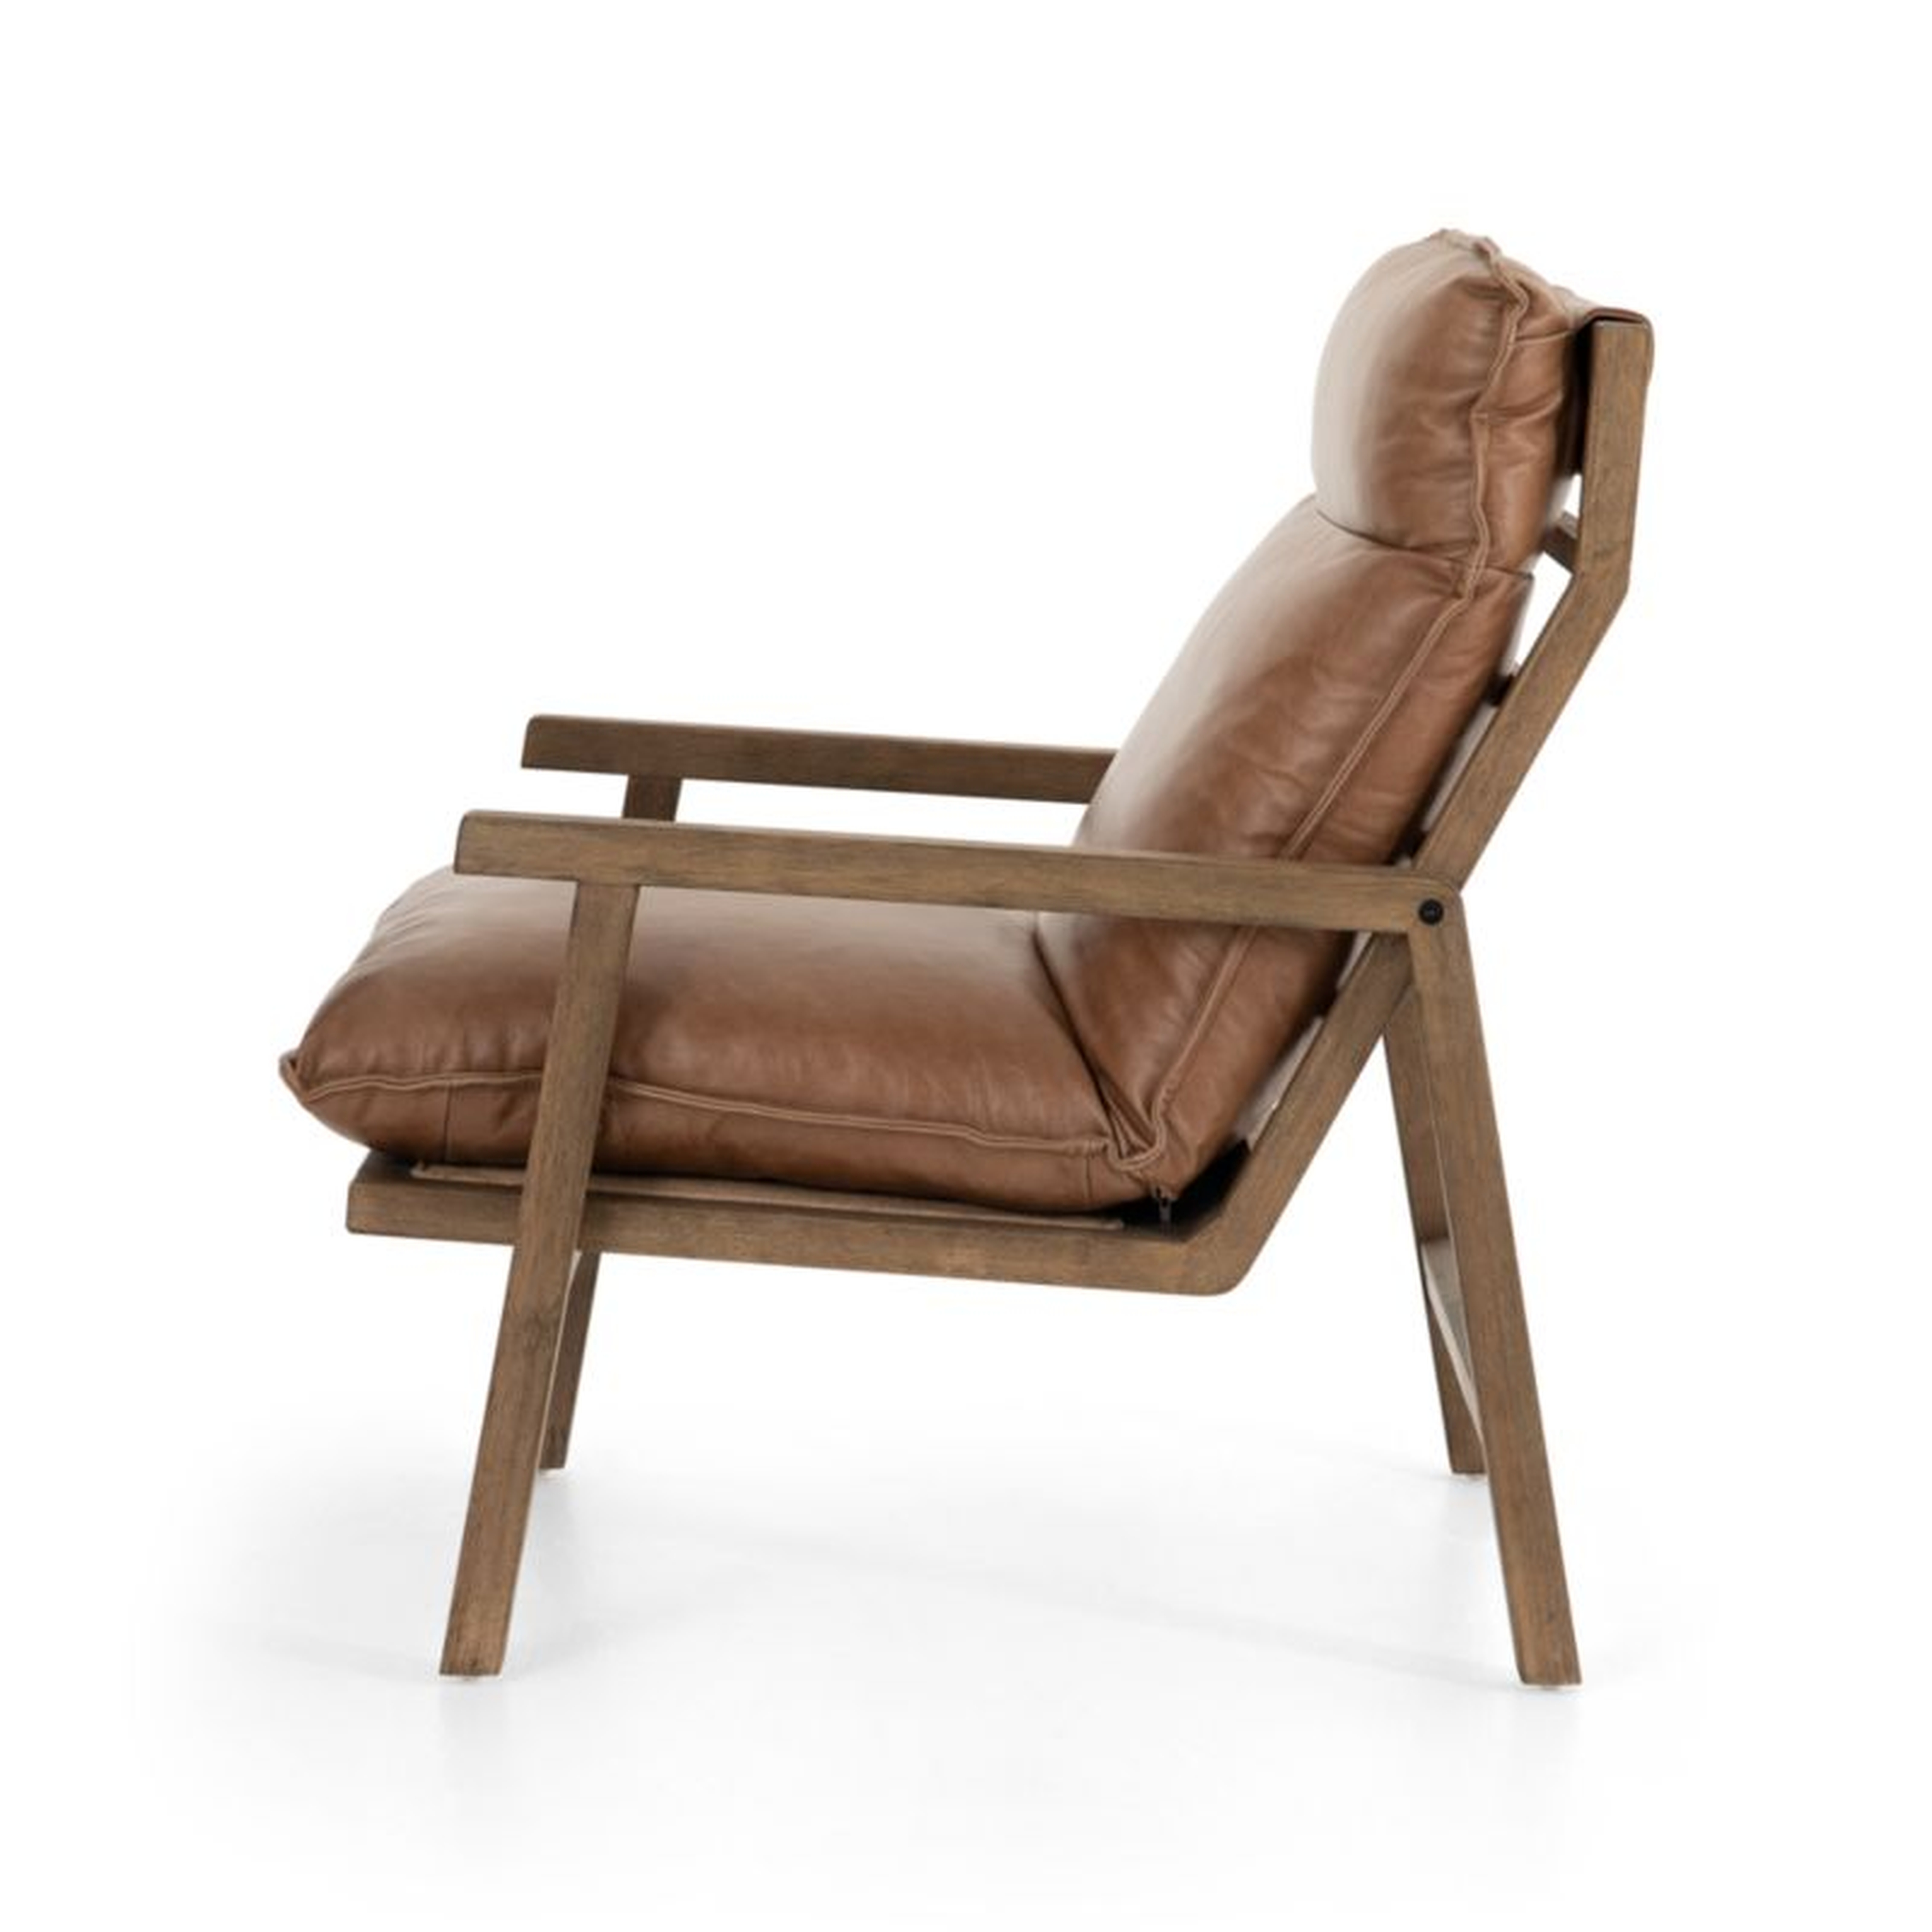 Tanner Chaps Saddle Leather Chair - Crate and Barrel